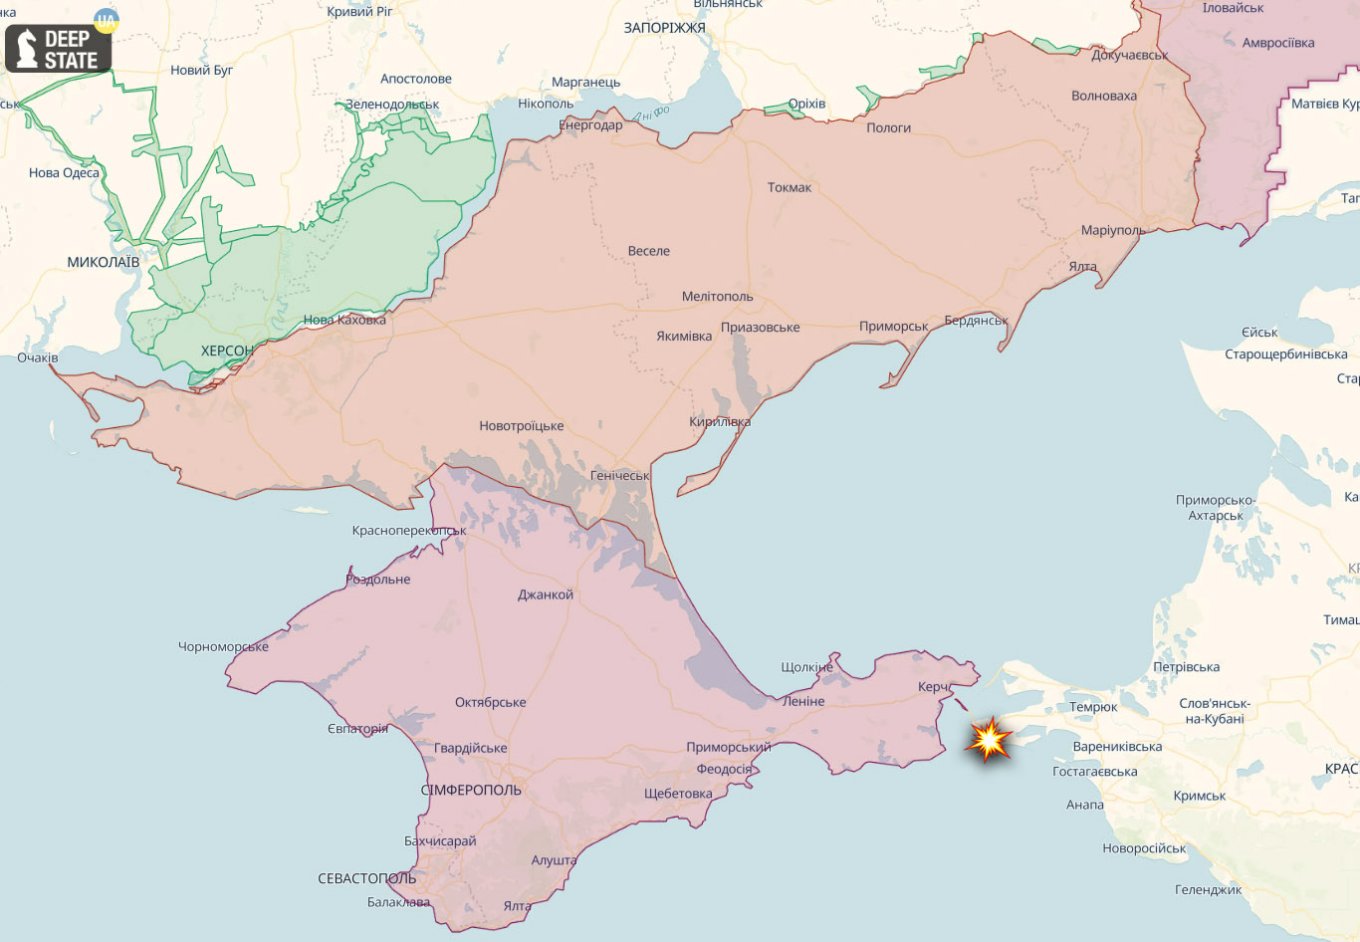 Another Two russia’s Strategic Objects Successfully Hit - the Largest Oil and Gas Terminal in the Black Sea, the Airfield where the An-124 Ruslan are Based, Defense Express